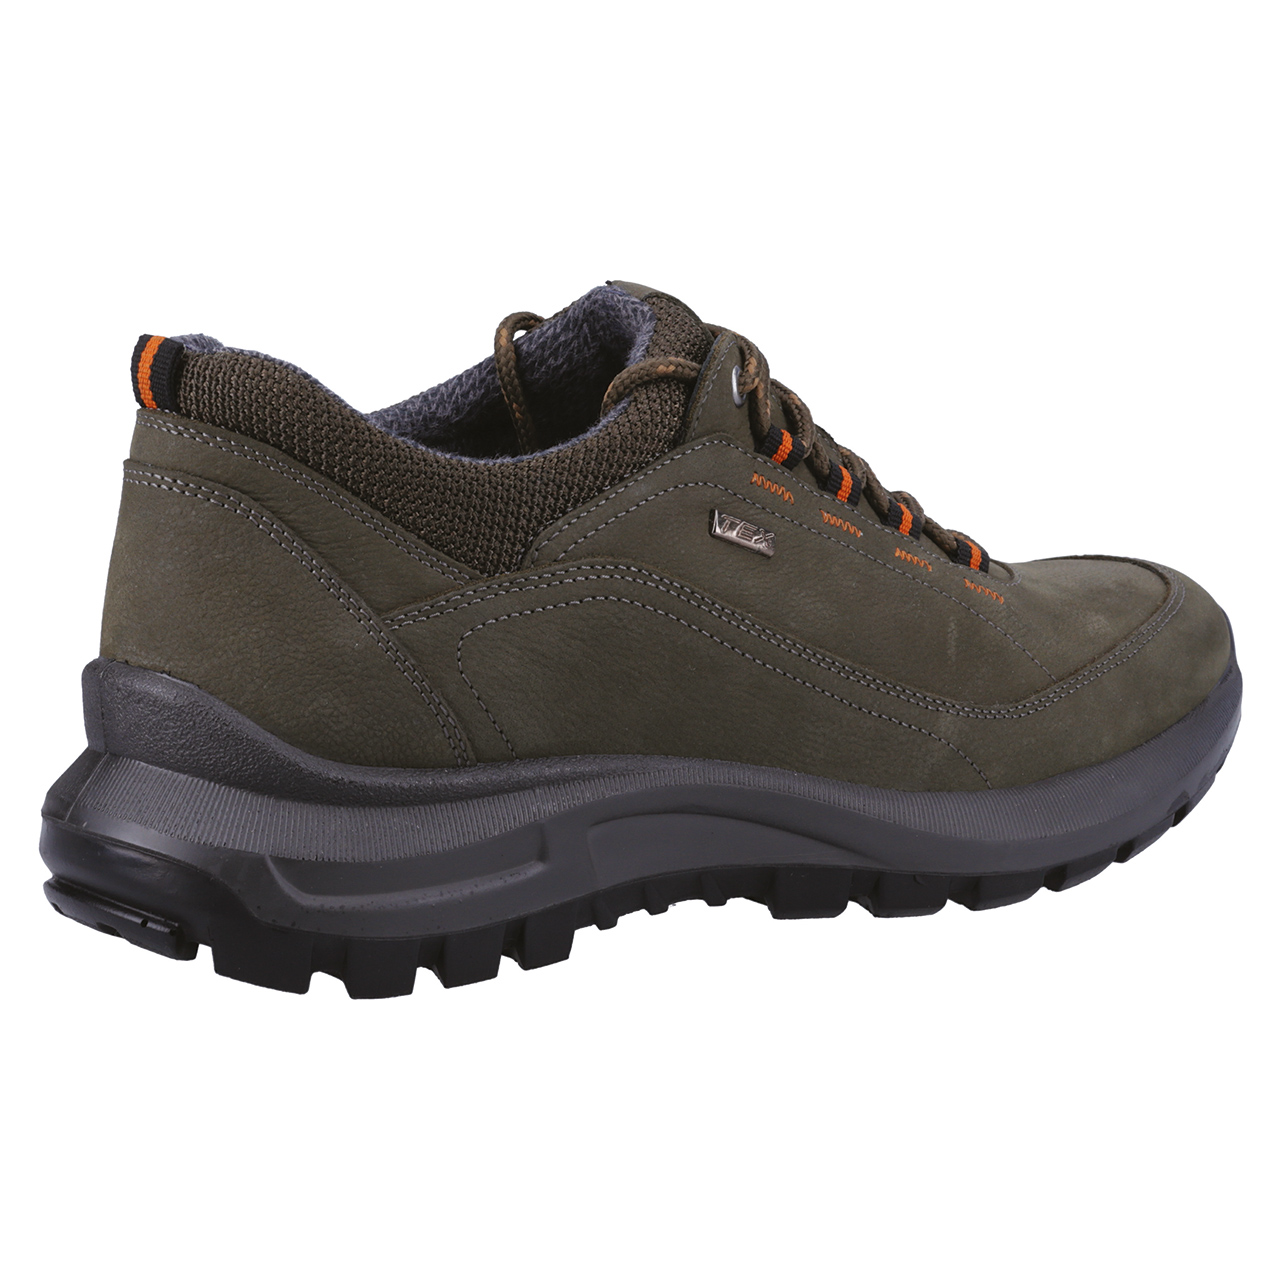 Dumbleton Lightweight Leather Waterproof Shoes